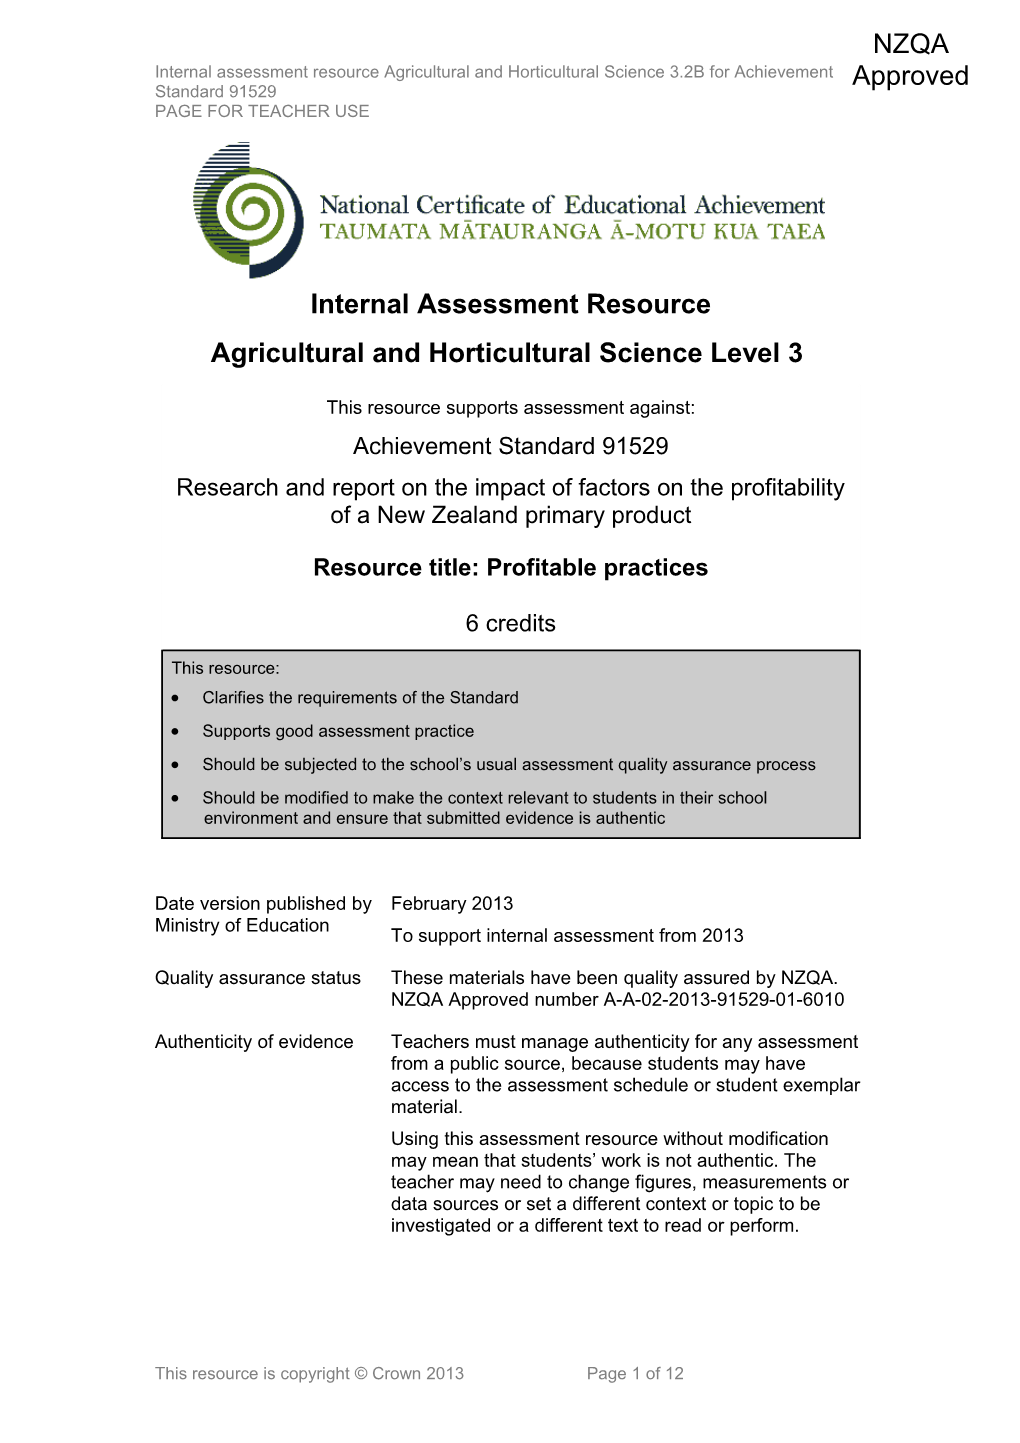 Level 3 Agricultural and Horticultural Science Internal Assessment Resource